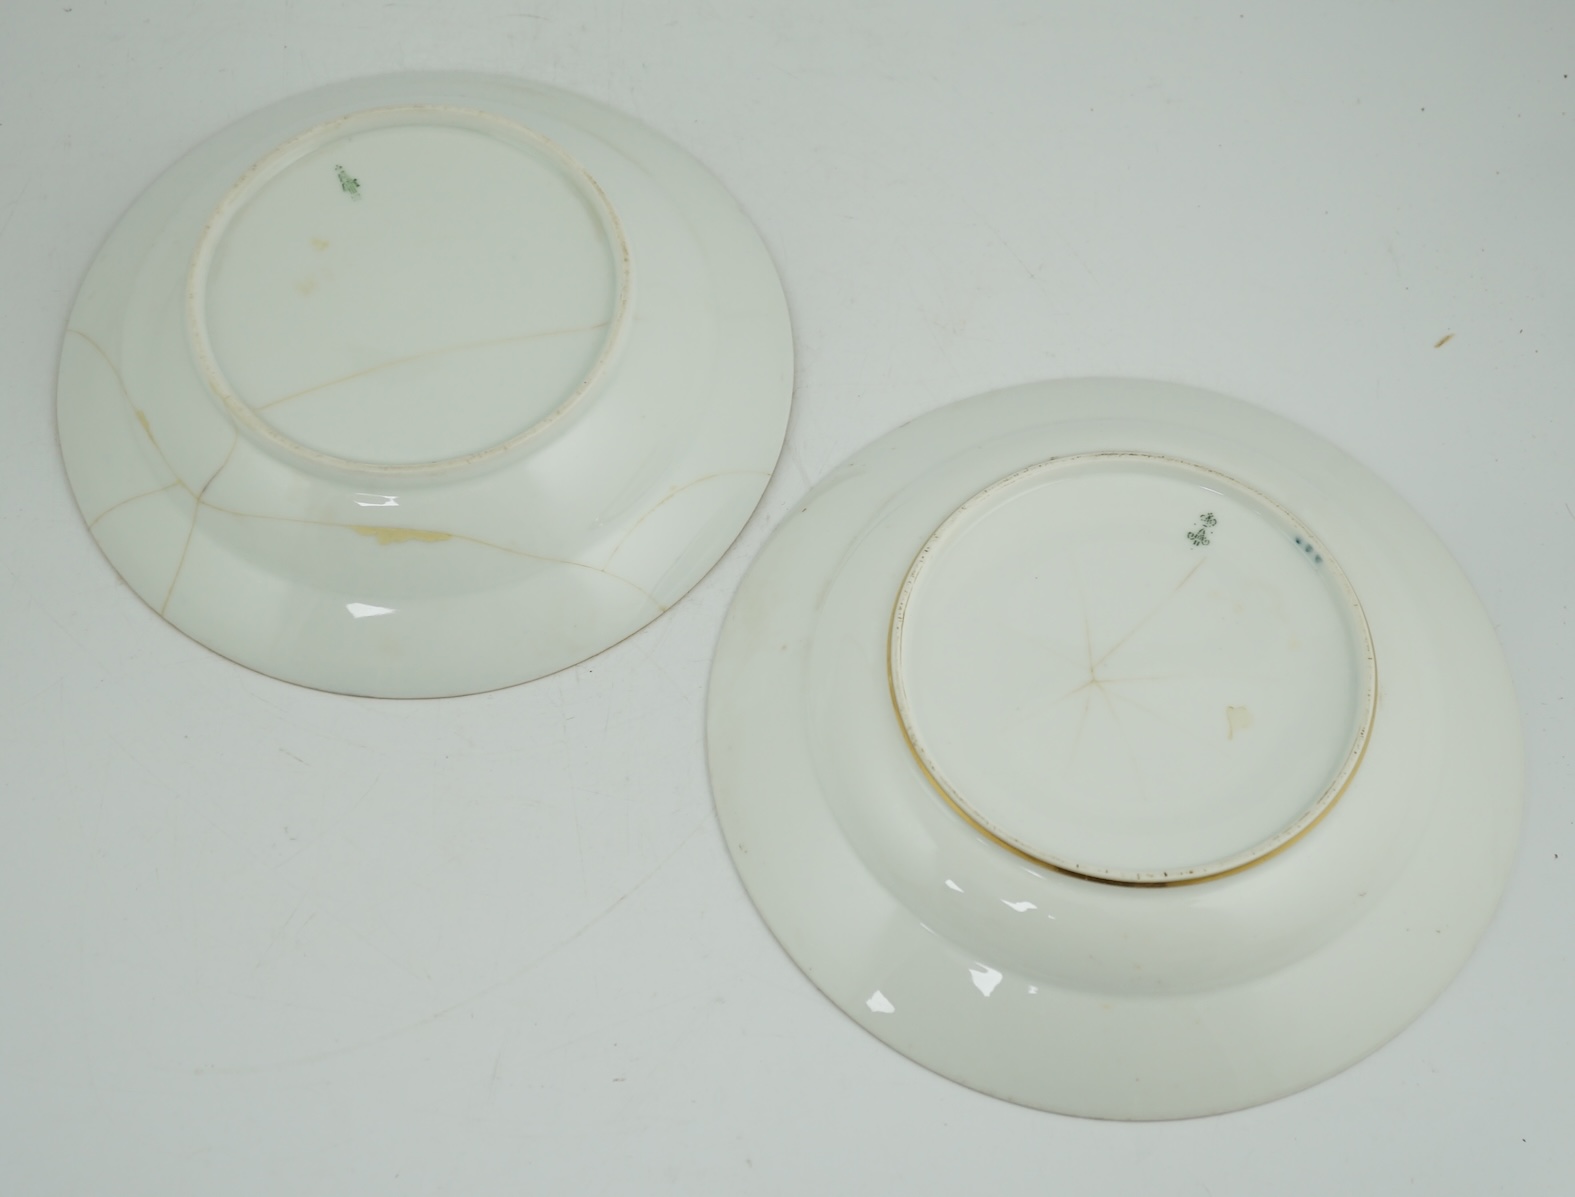 A pair of Nicholas II Imperial porcelain factory plates, from the Gothic service, green printed marks, 23.5cm diameter. Condition - poor to fair repairs